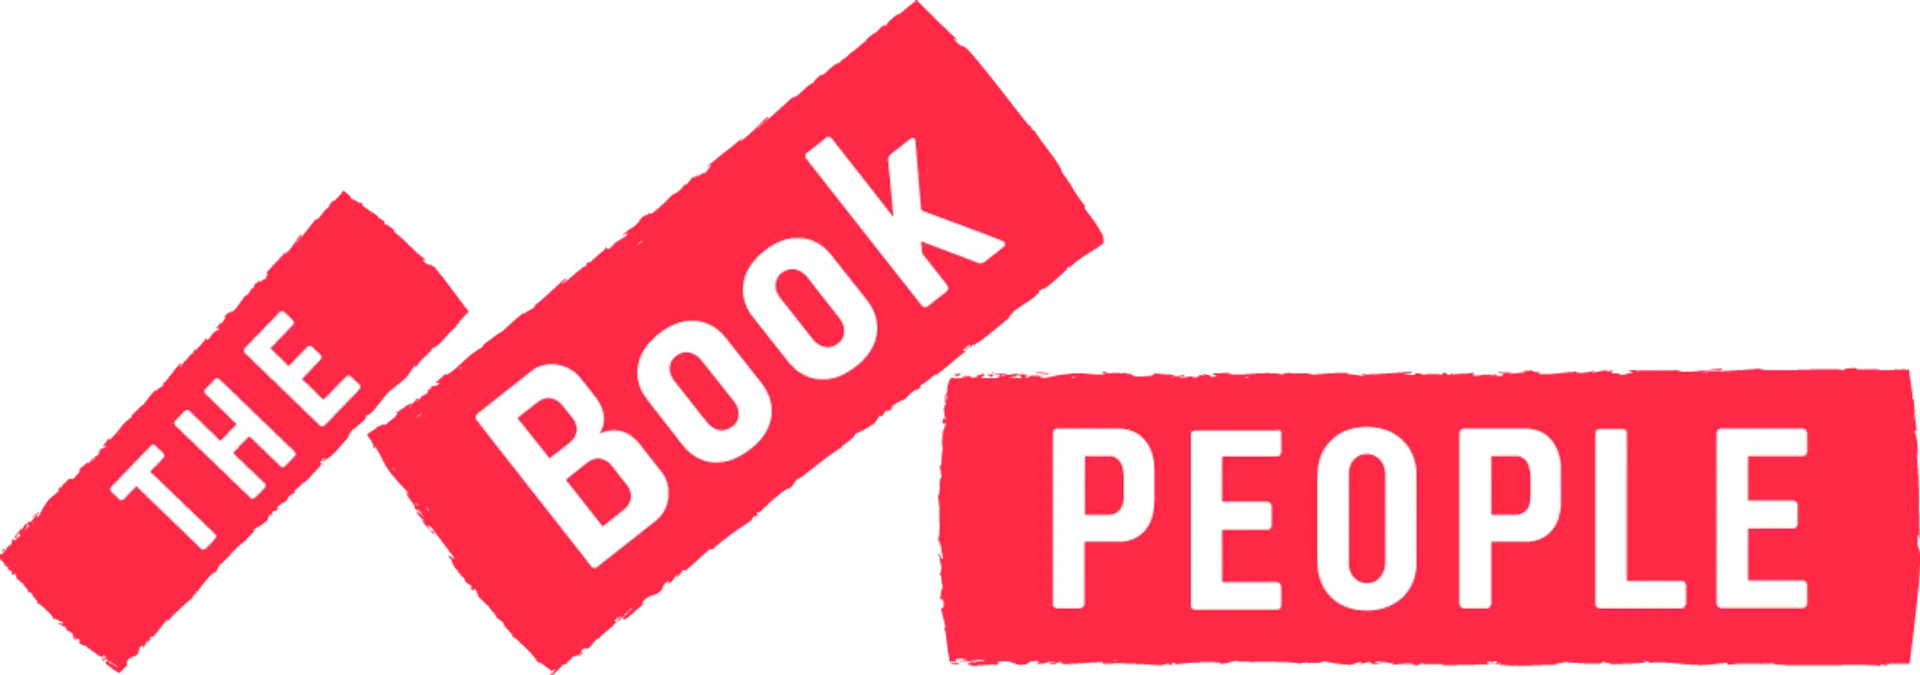 THE BOOK PEOPLE logo